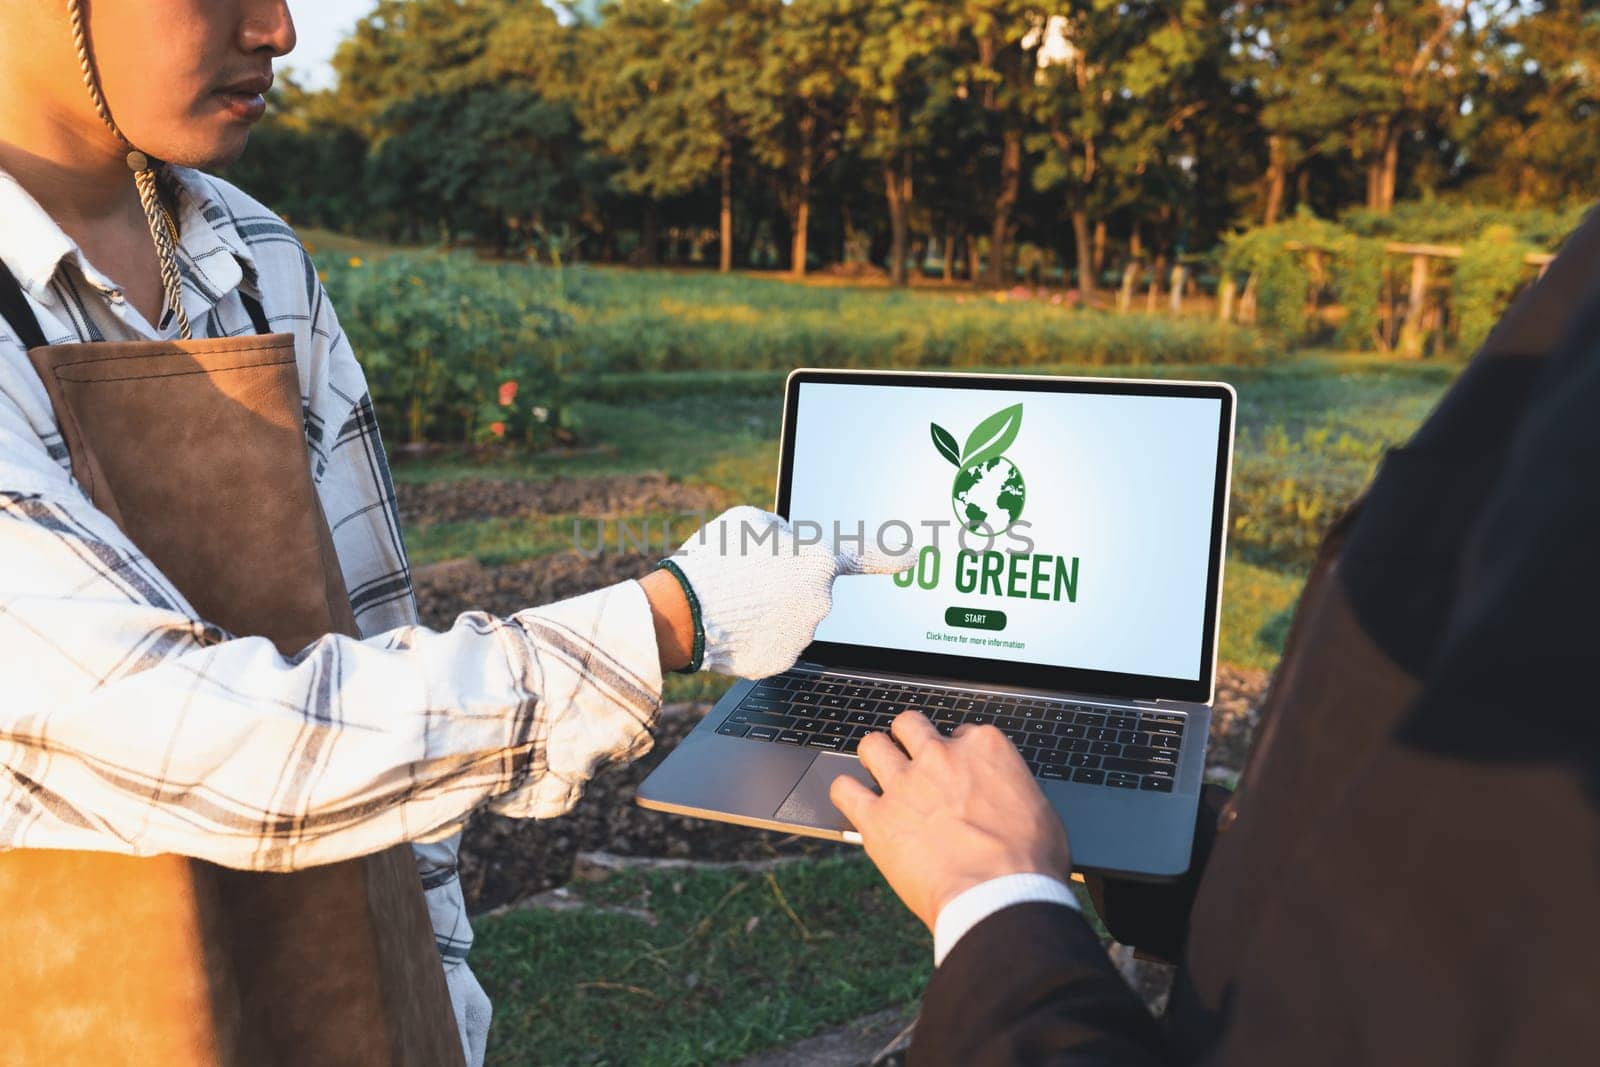 Eco-business company empower farmer with eco-friendly farming practice and clean agricultural technology. Cultivate sustainable farming methods as commitment to environment for greener future.Gyre